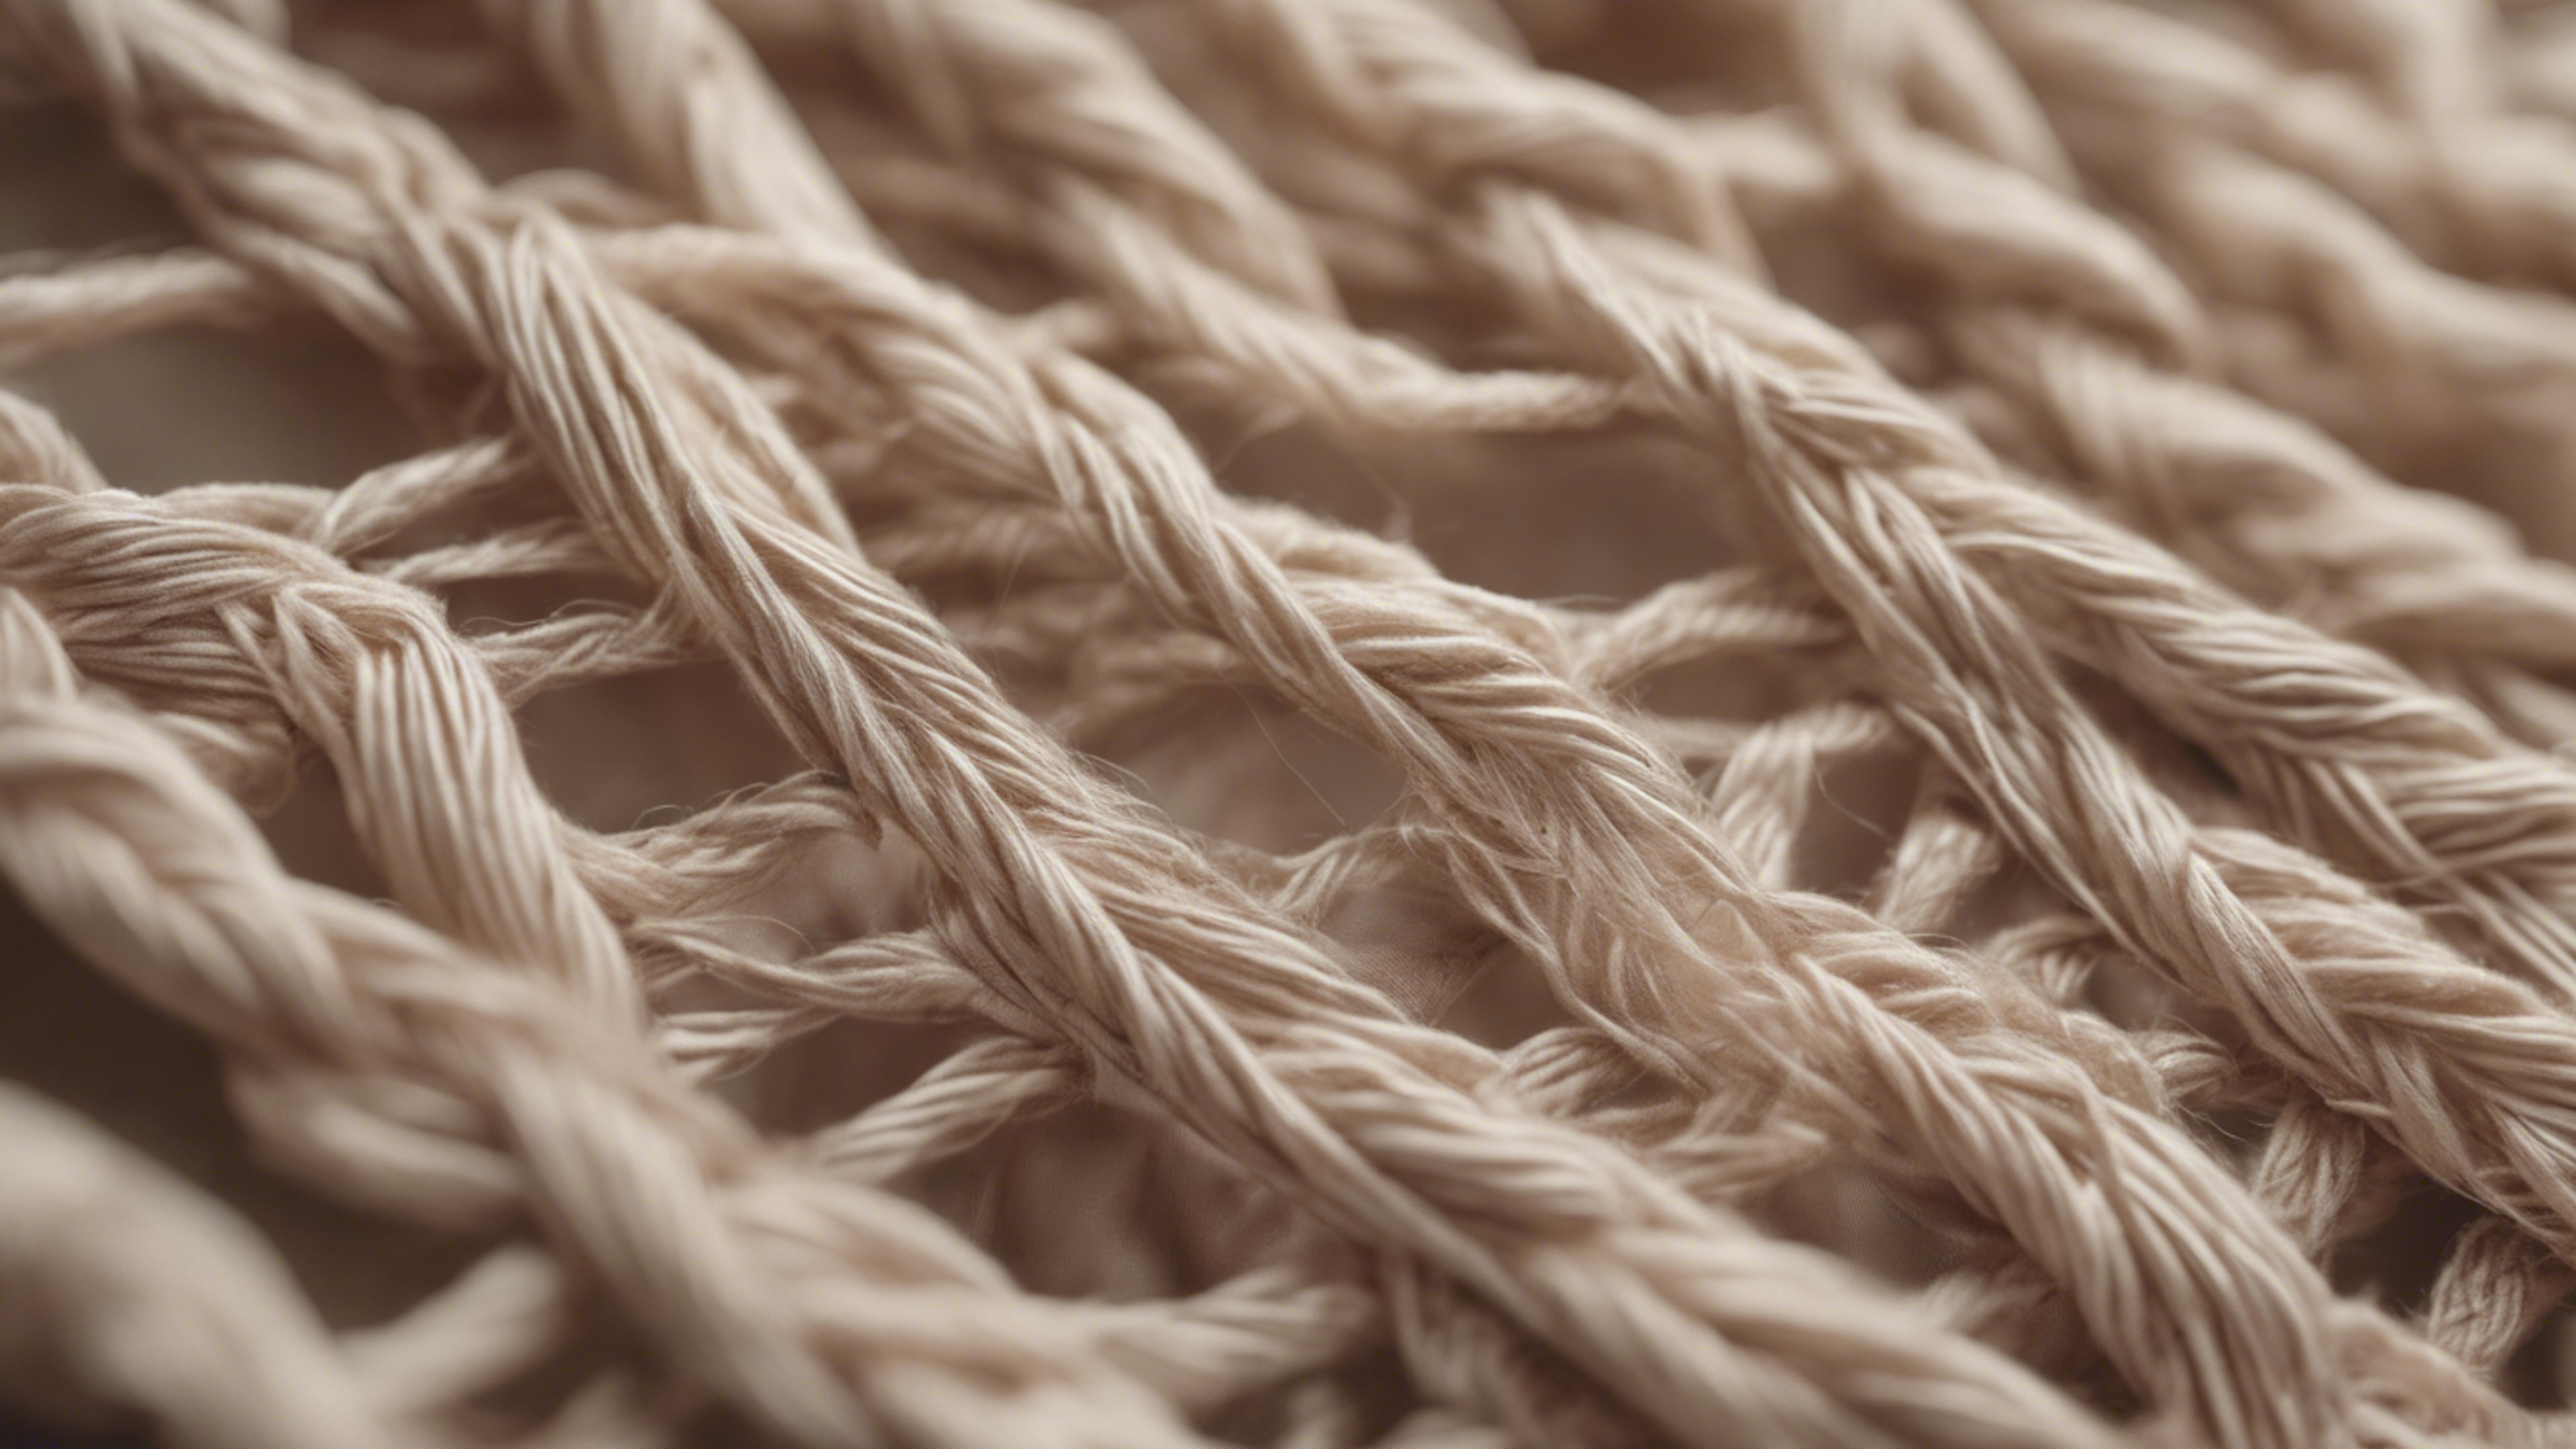 A close-up of cool beige threads interweaving to form a unique, patterned fabric. Kertas dinding[e47f0bd142b54d48a5a0]